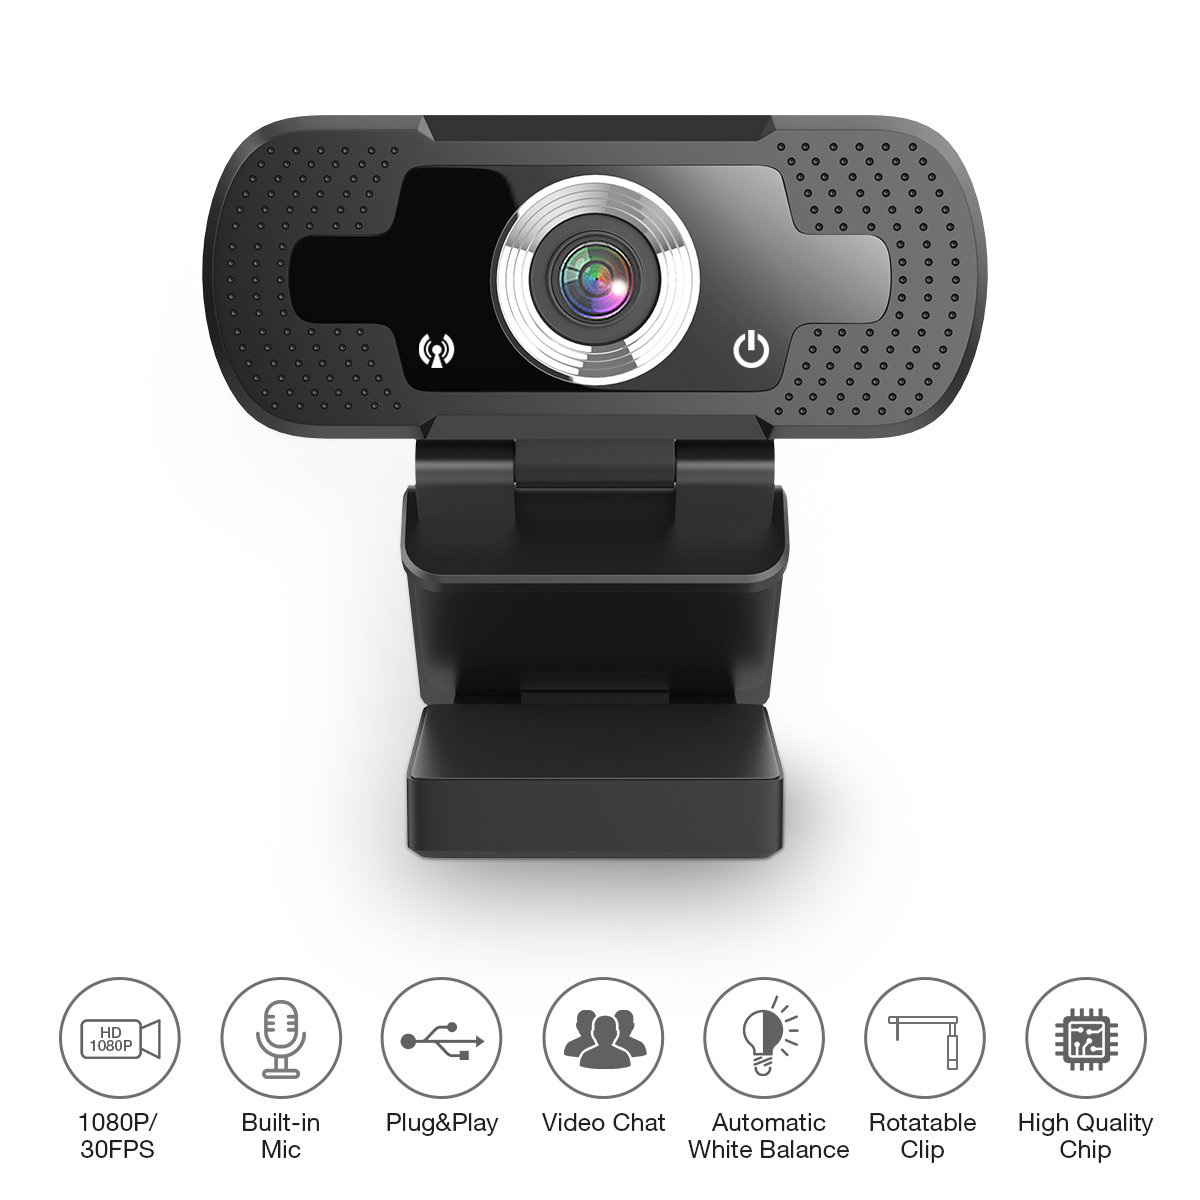 SAWAKE-1080P-HD-Webcam-Auto-Focus-30FPS-USB-Wired-Foldable-Computer-Camera-with-Built-in-Microphone-1941134-2